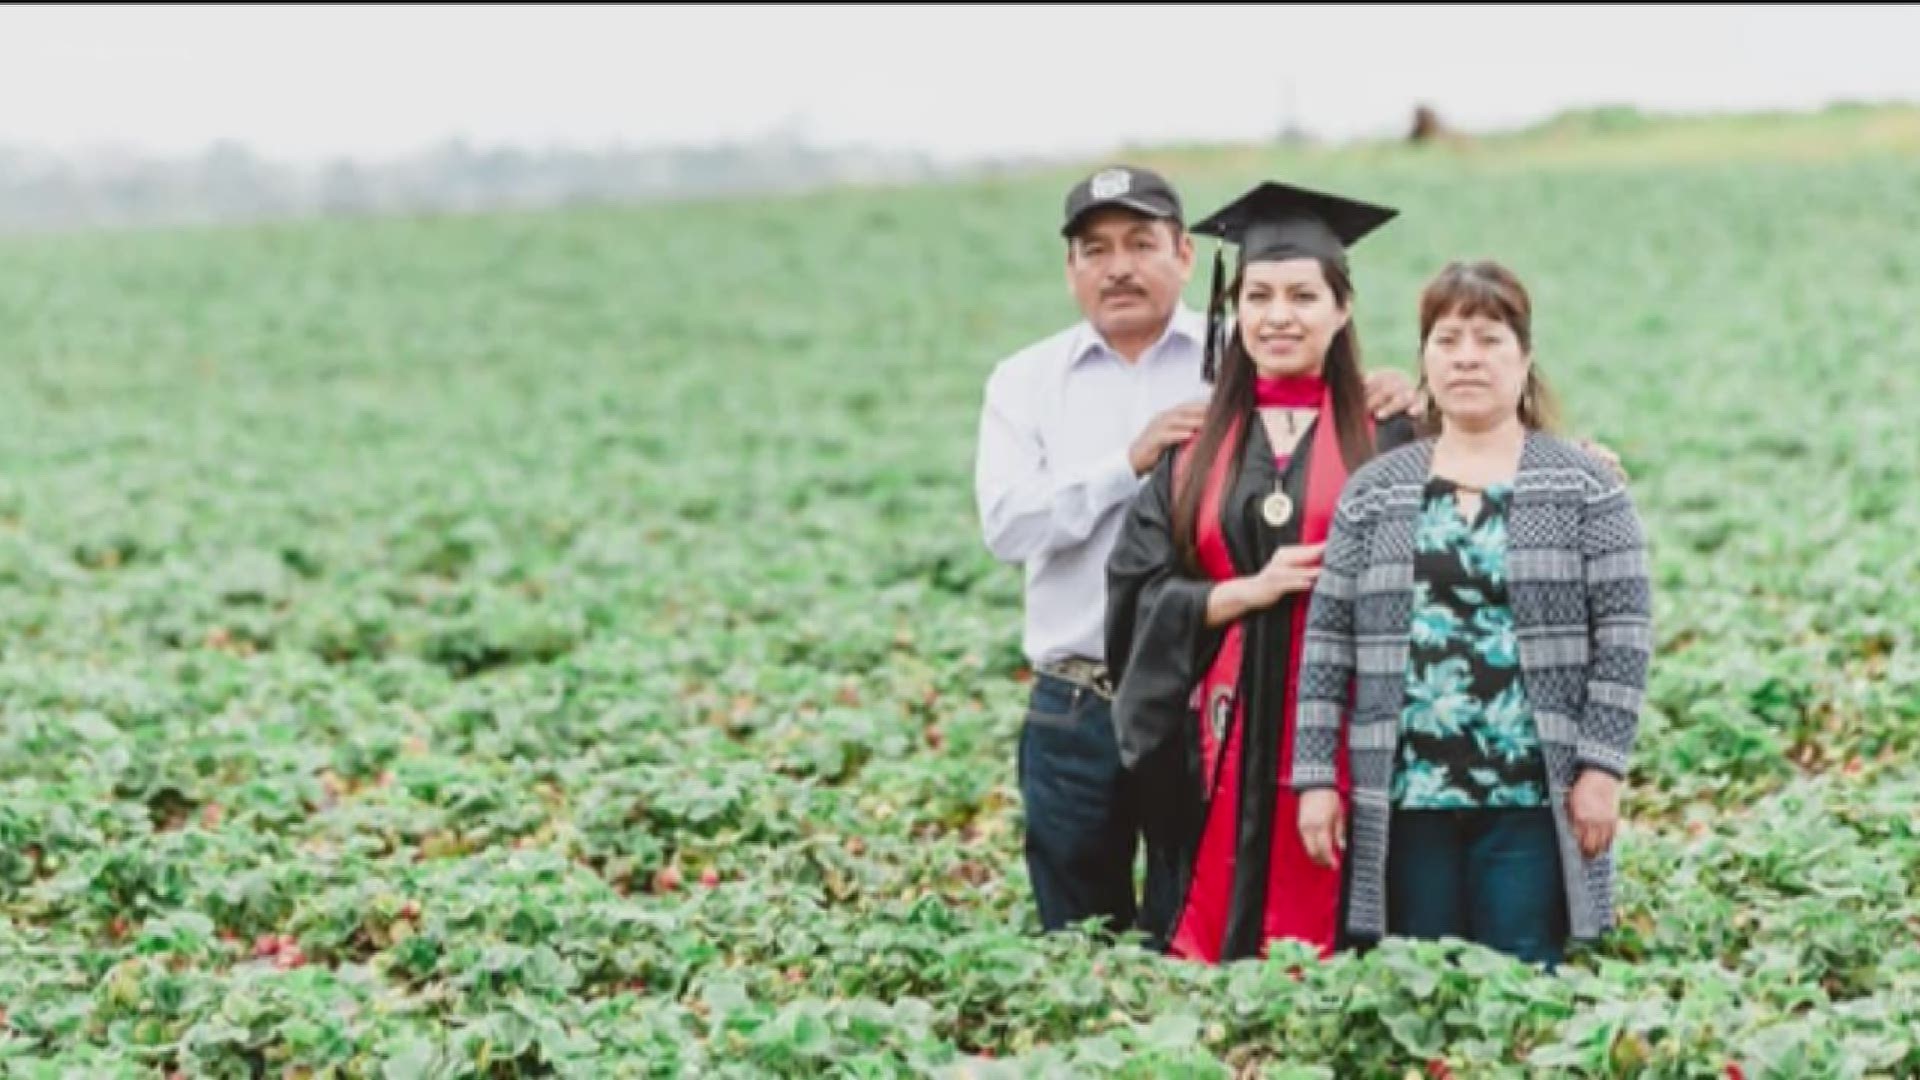 A San Diego State University graduate’s photographs of her standing with her immigrant parents in the agricultural fields where they work have gone viral.